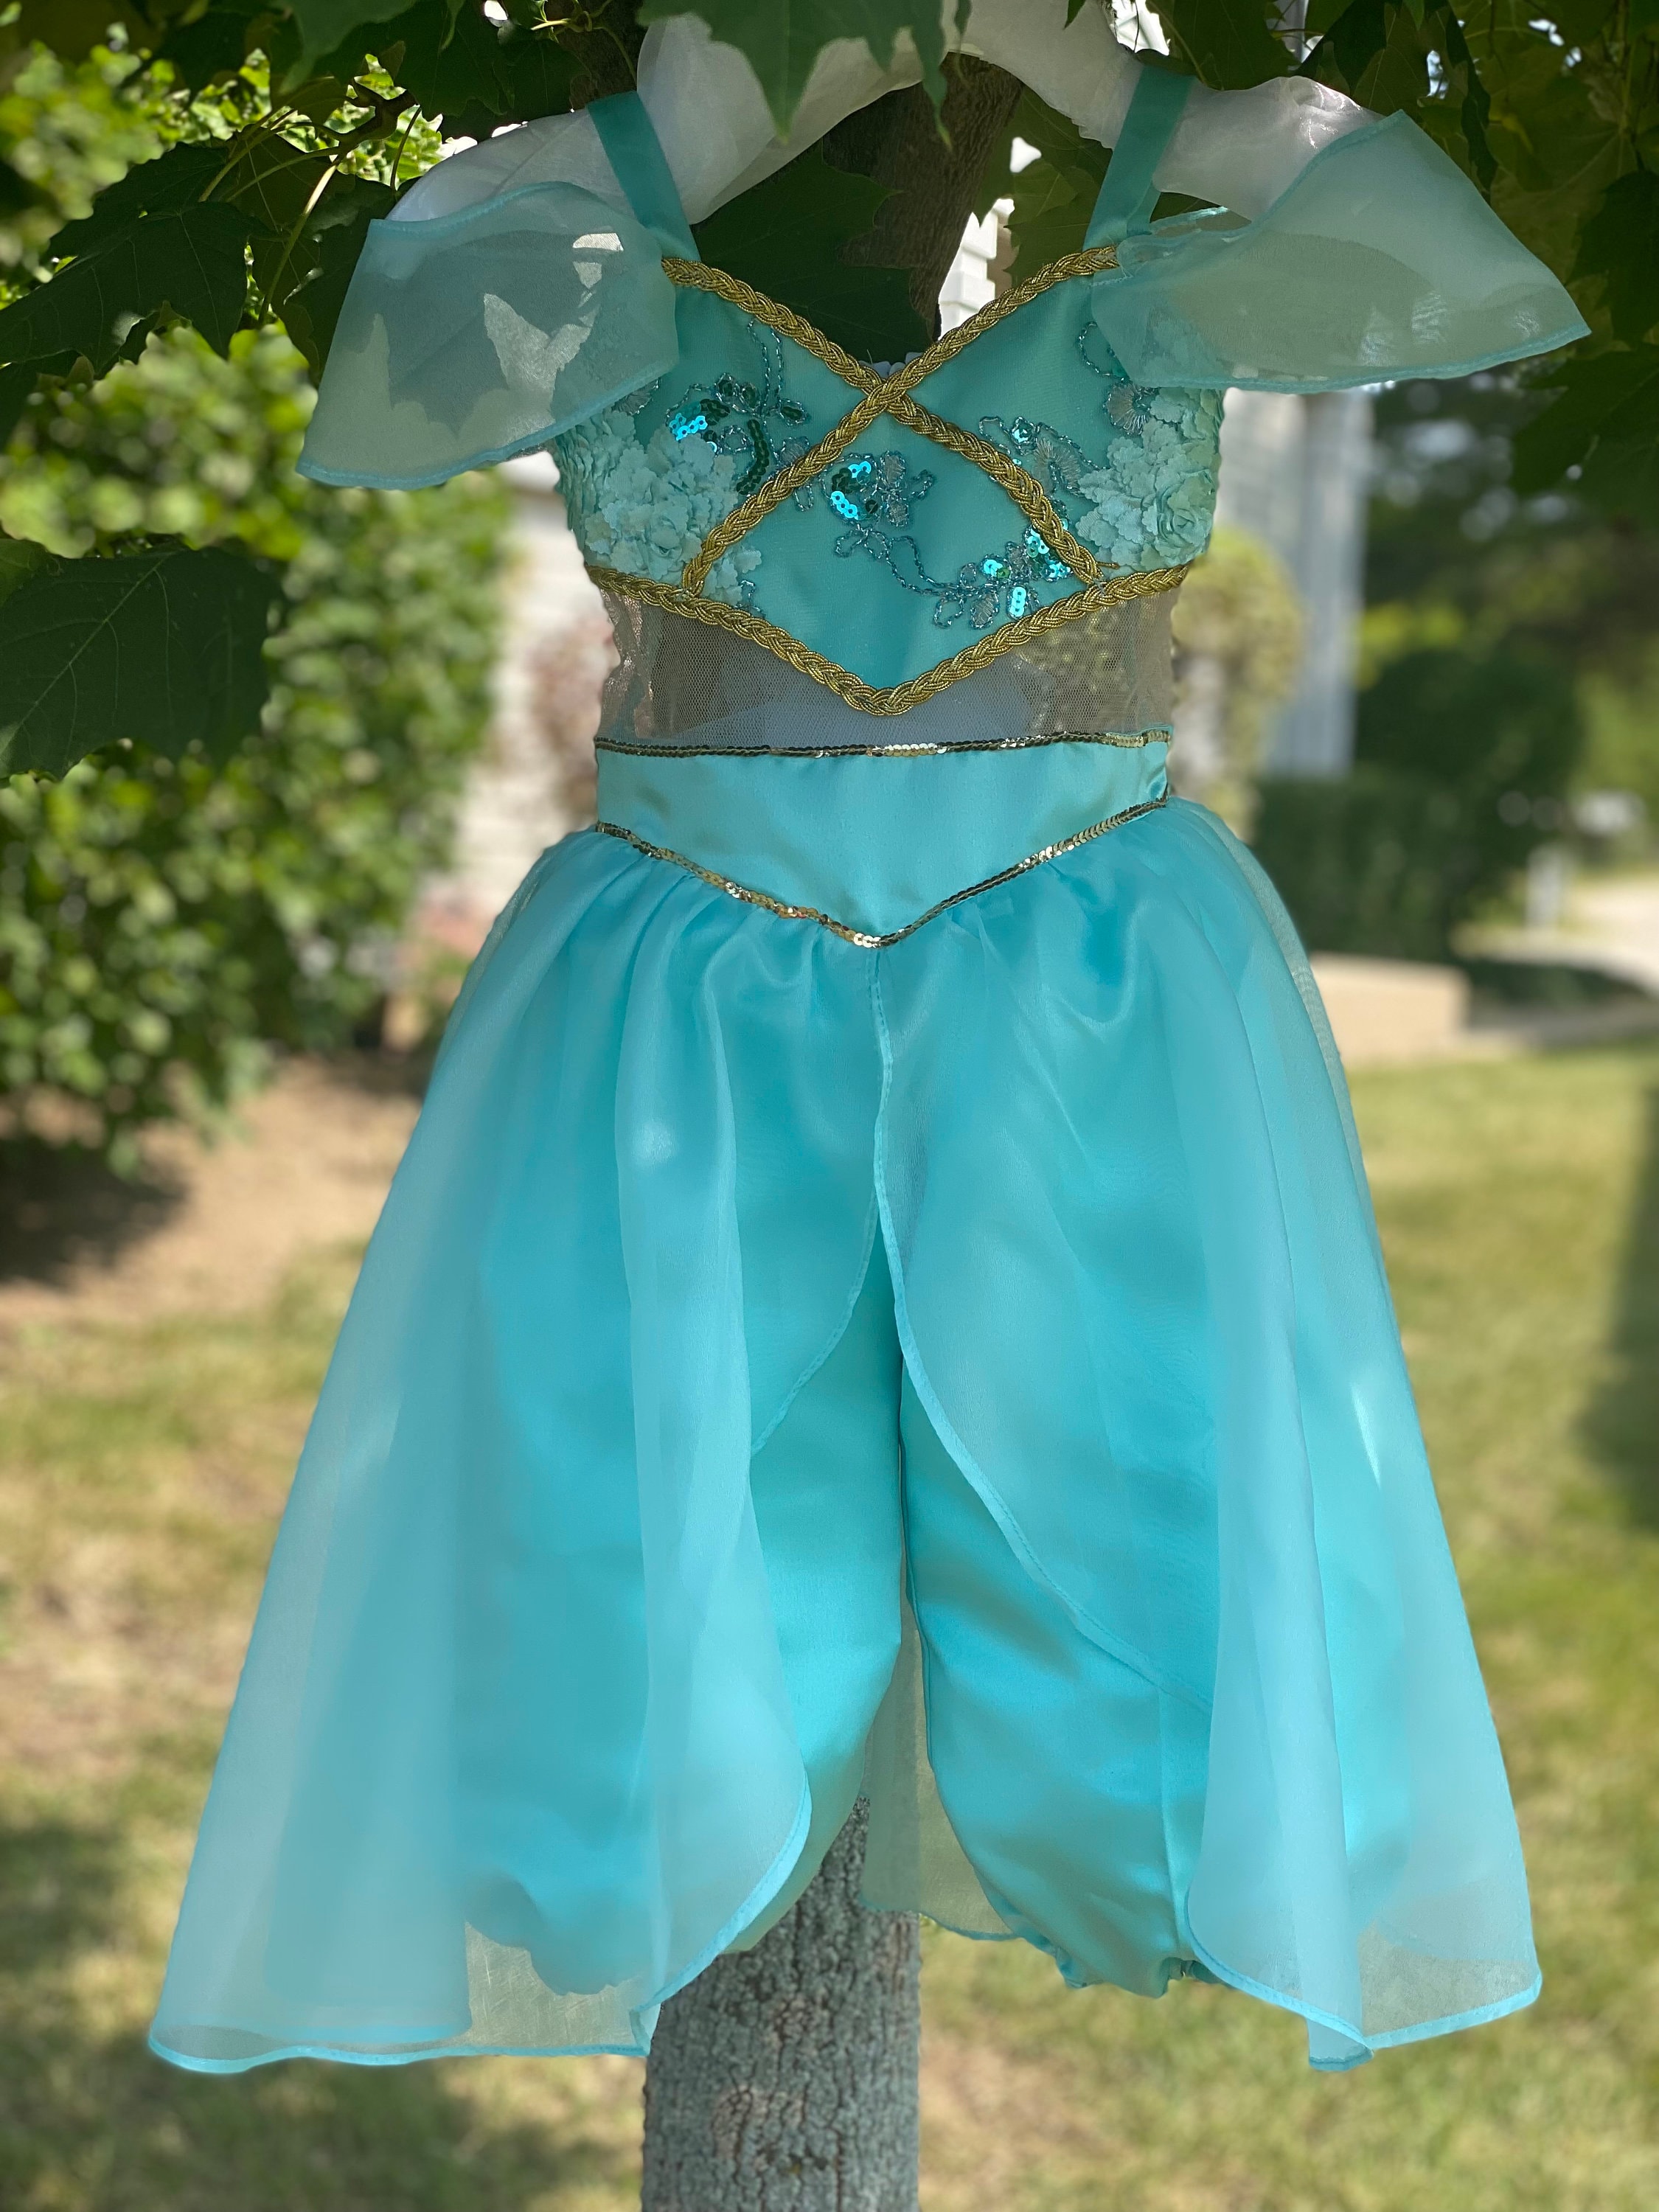 Buy Jasmine Deluxe Disney Princess Aladdin Costume, Small/4-6X Online at  Low Prices in India - Amazon.in